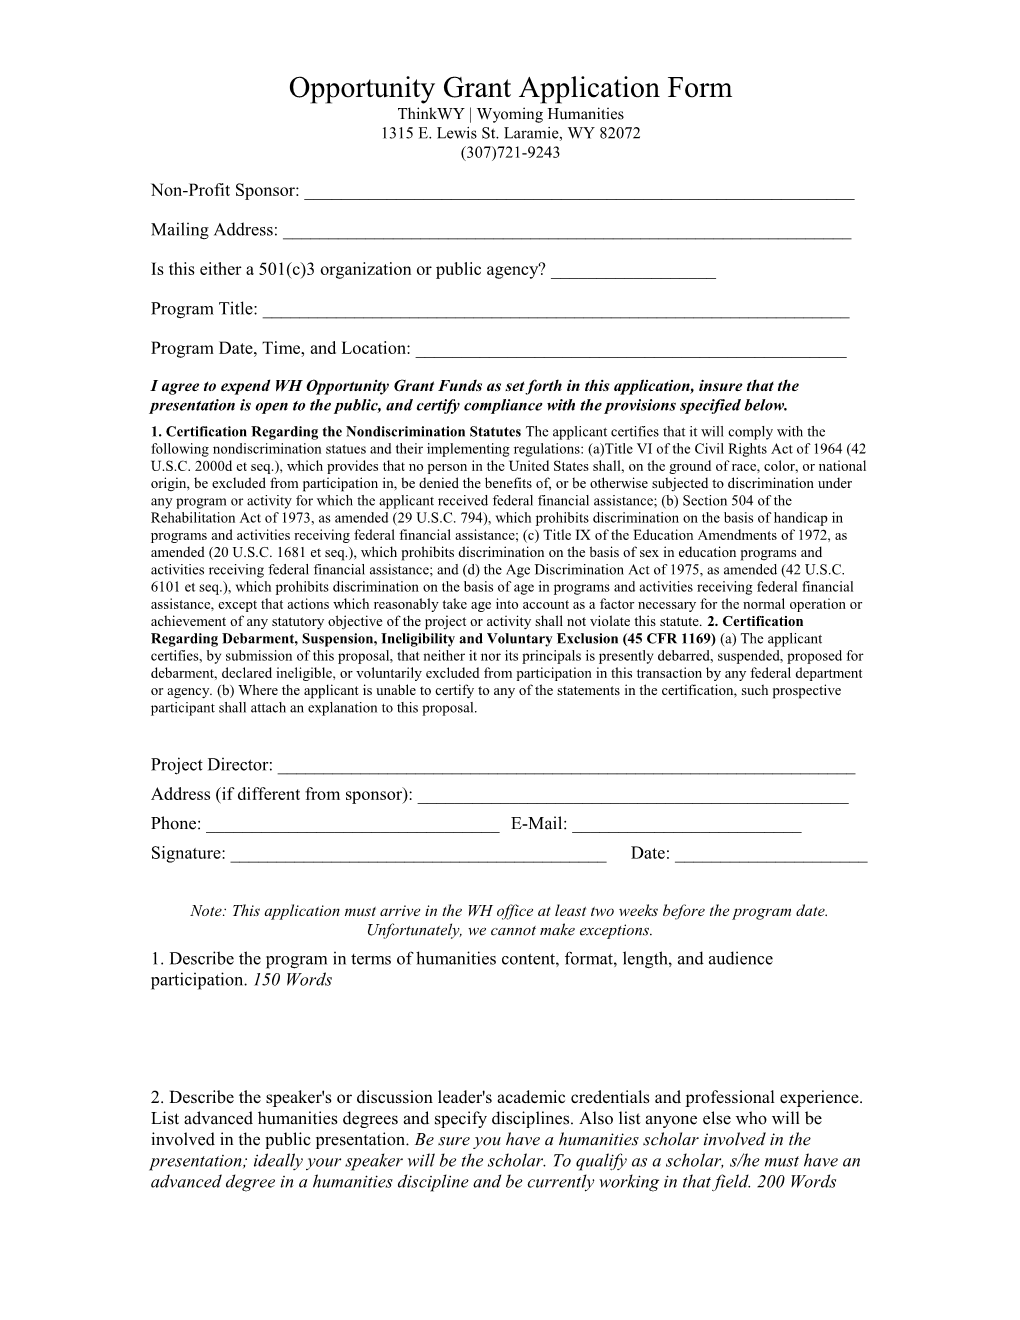 Opportunity Grant Application Form